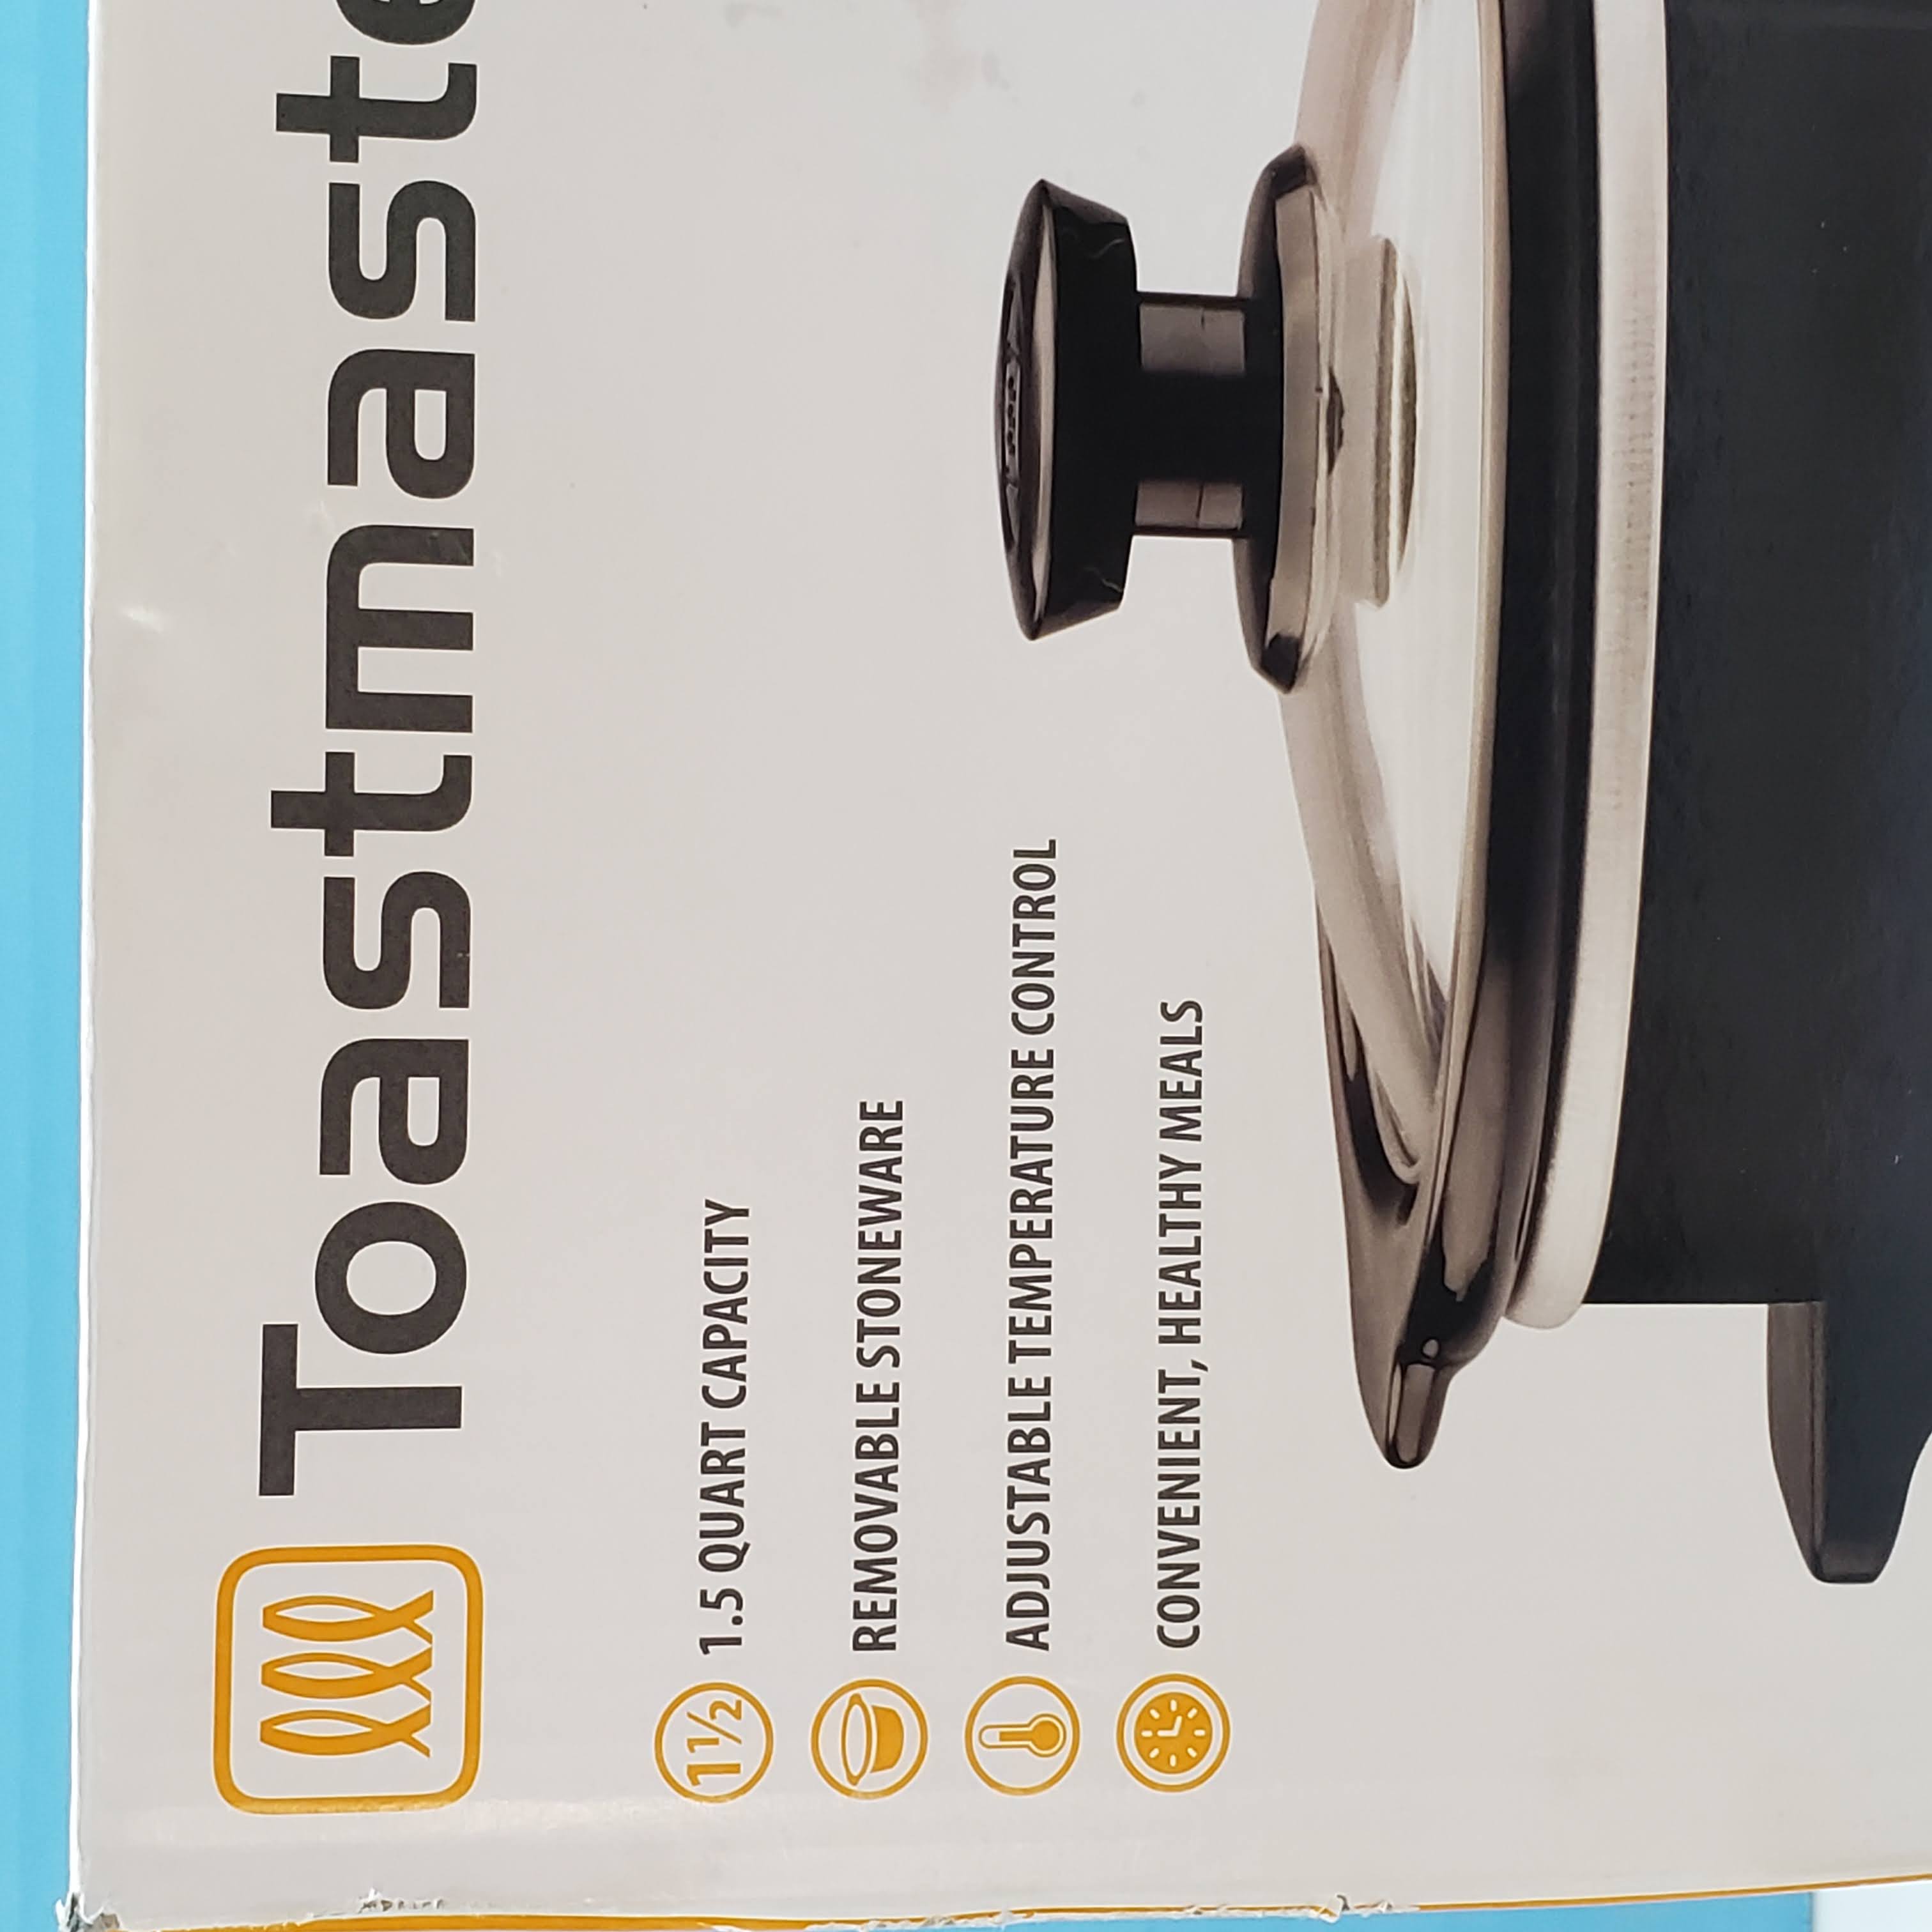 Sold at Auction: Toast Master 1.5 Quart Slow Cooker, Brand New